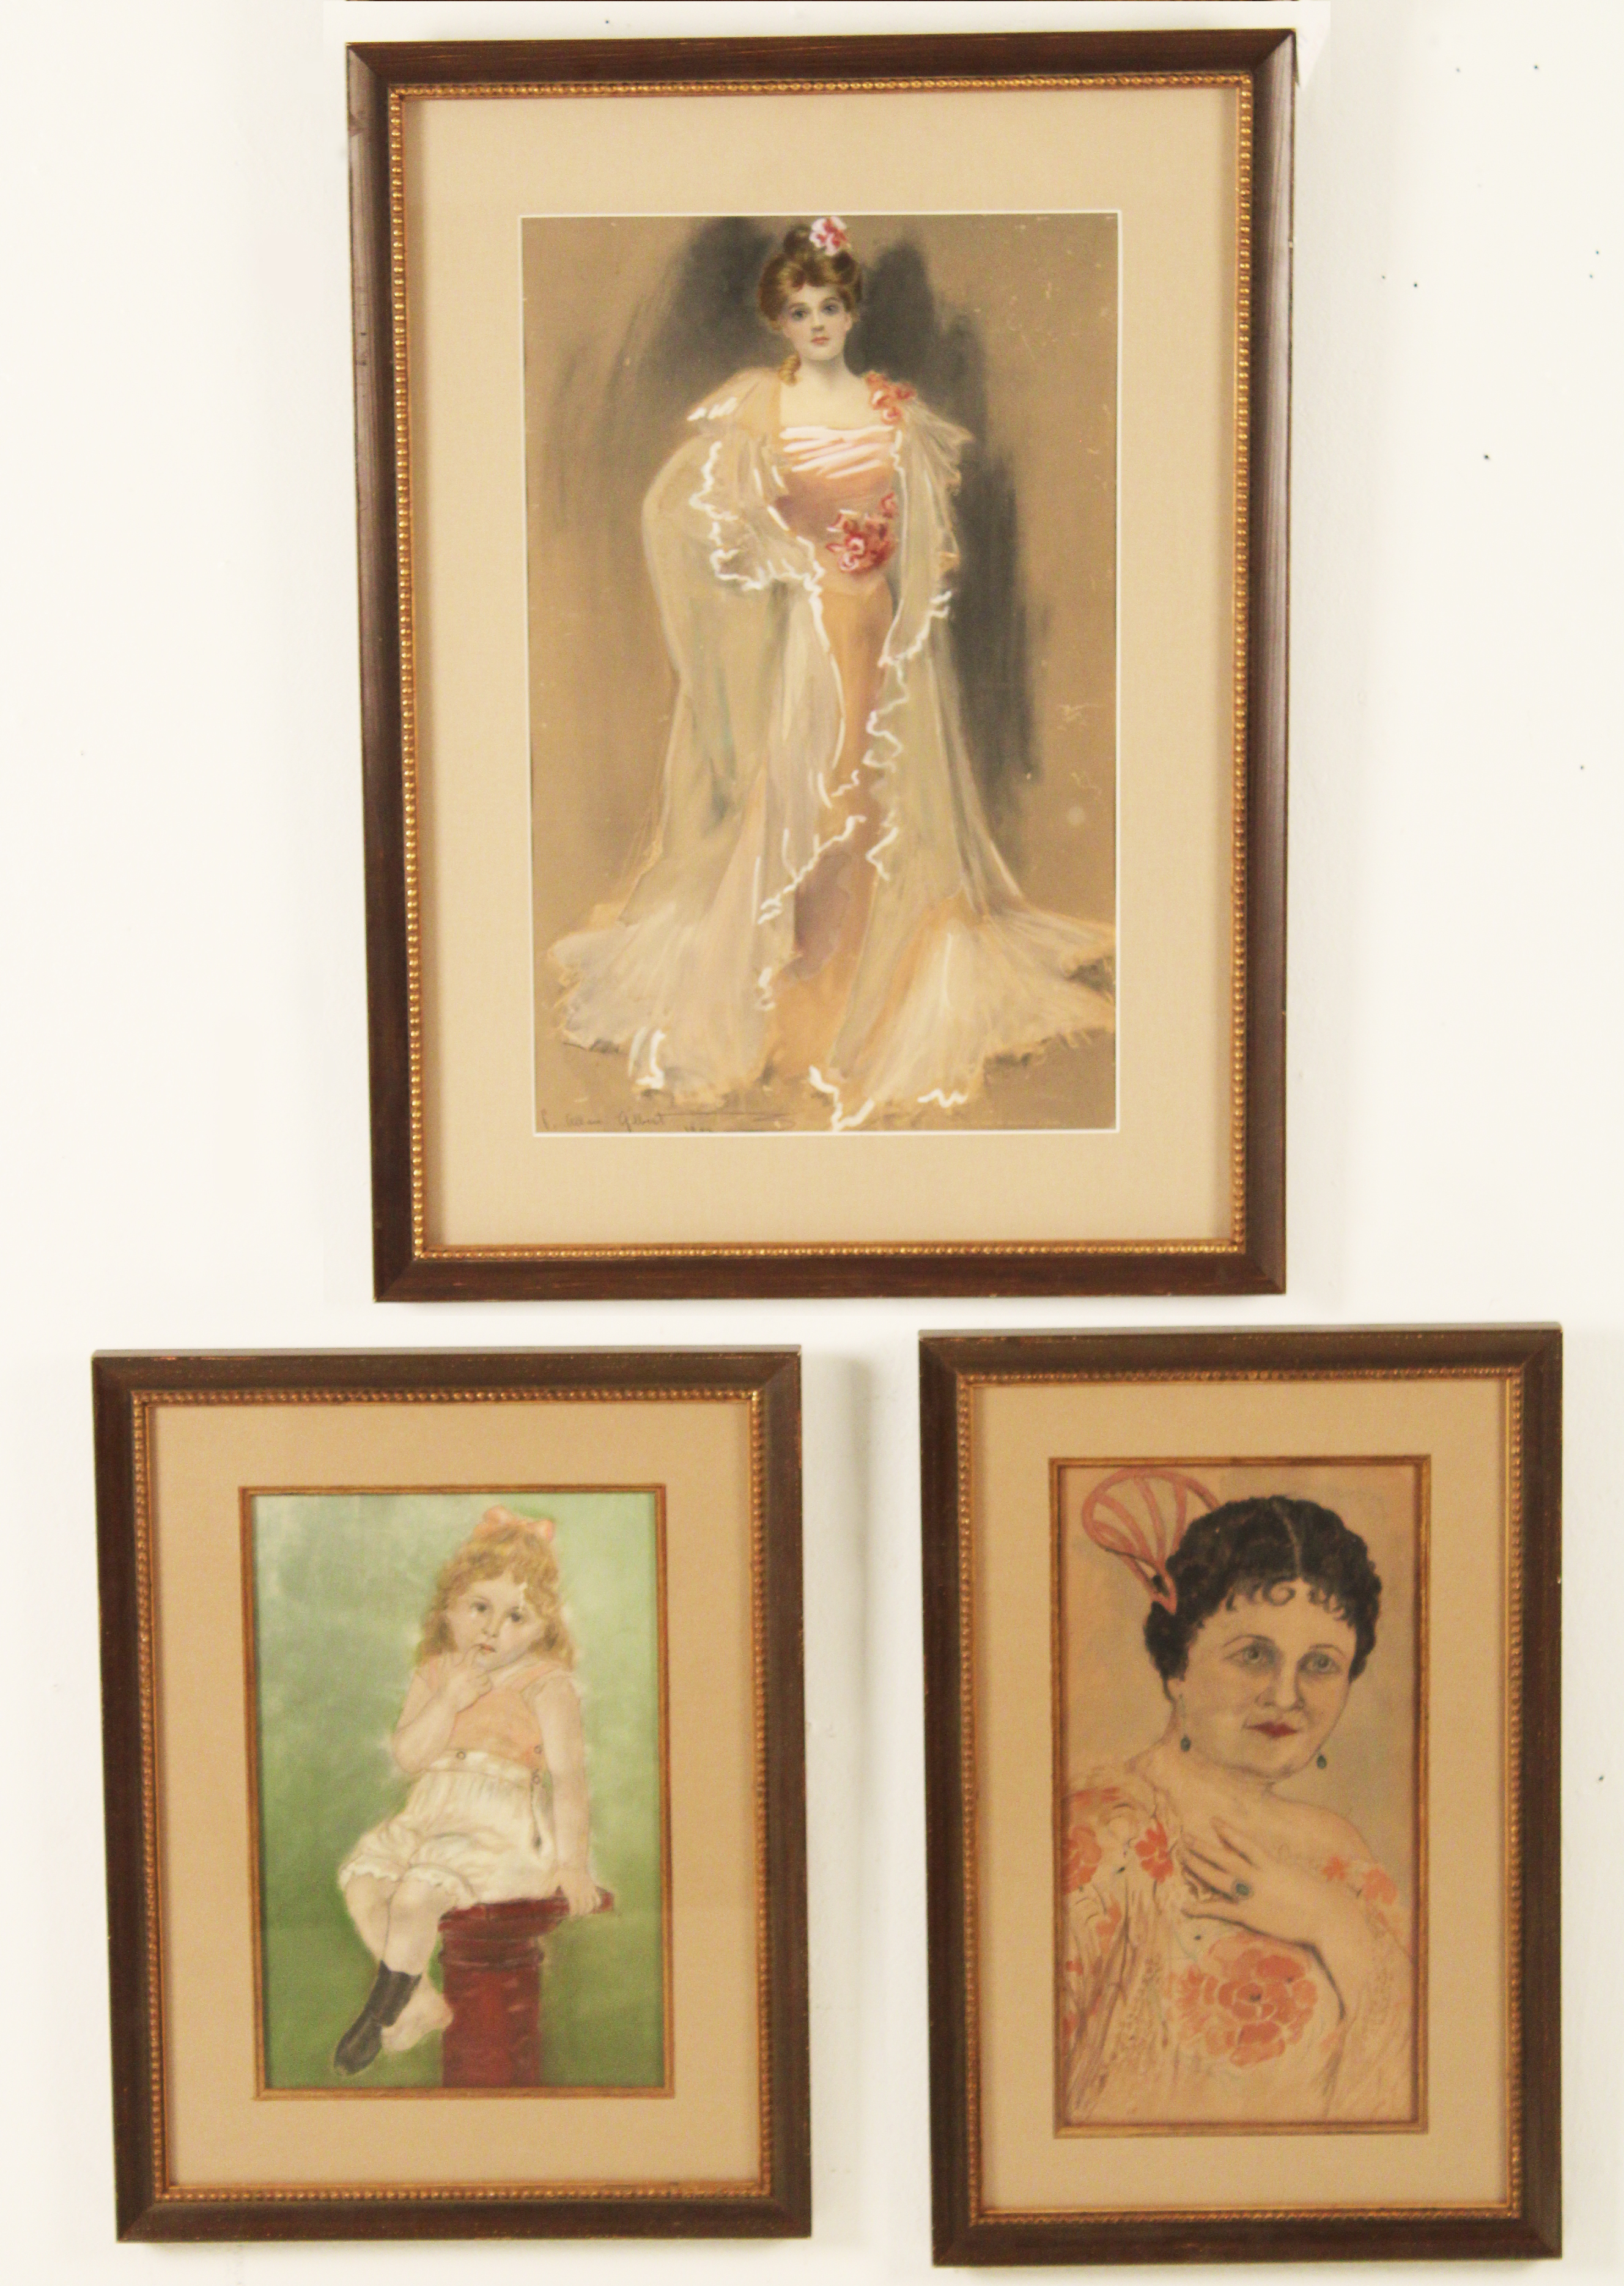 3 PASTEL ON PAPER PORTRAITS SIGNED 35f135